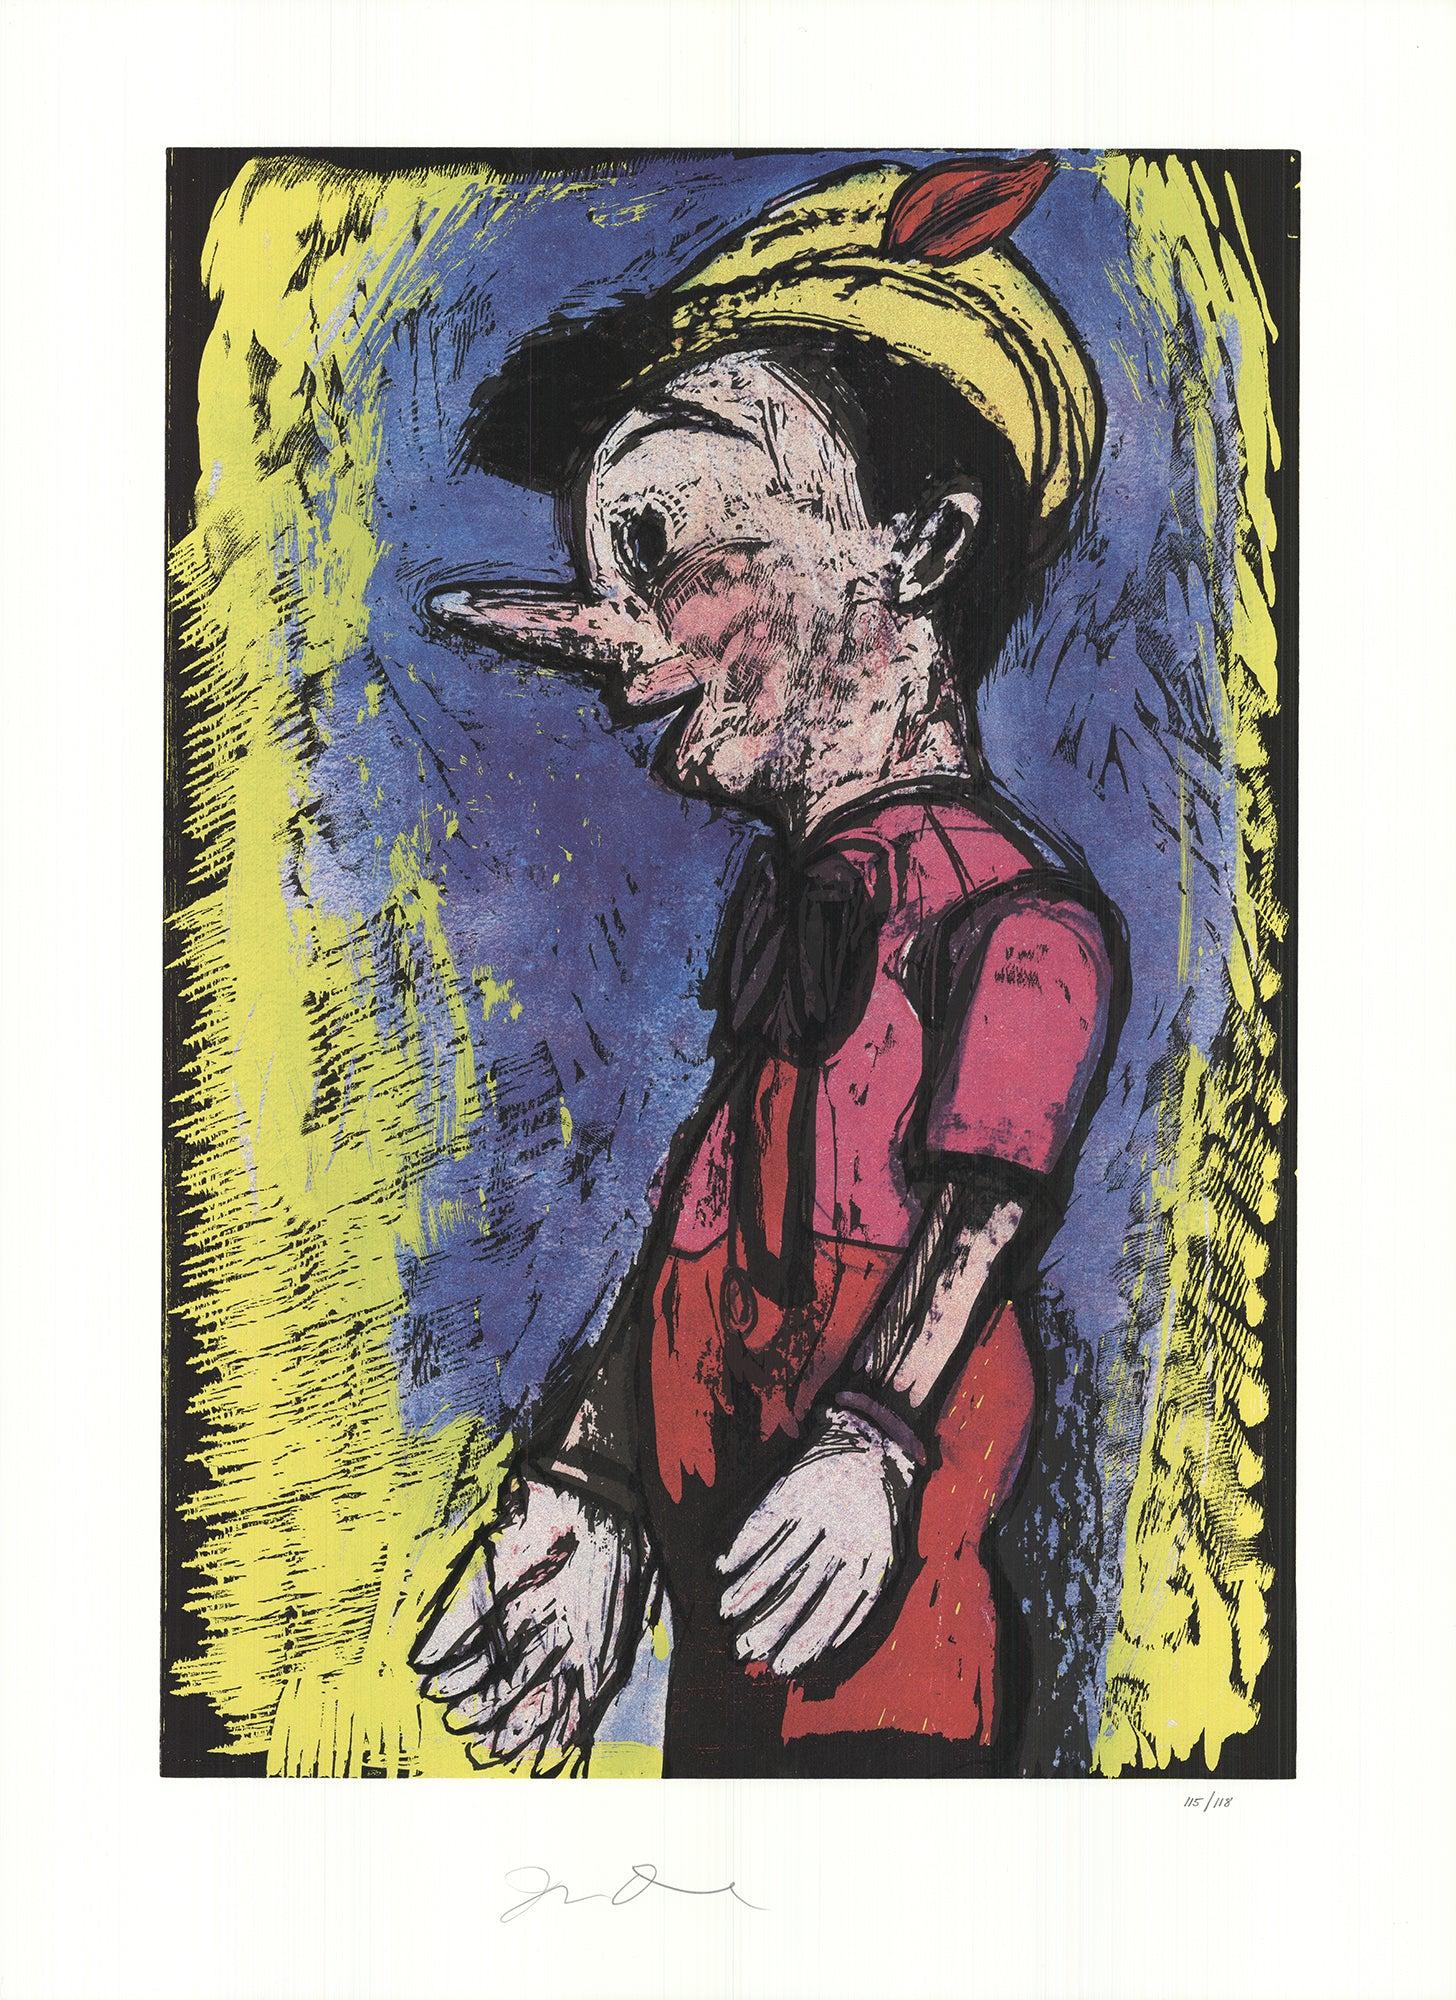 Paper Size: 33 x 24.5 inches ( 83.82 x 62.23 cm )
Image Size: 30 x 21 inches ( 76.2 x 53.34 cm )
This fascinating piece of artwork by Jim Dine titled "Pinocchio," features a seven-color silkscreen and woodcut print. The dimensions of the paper and